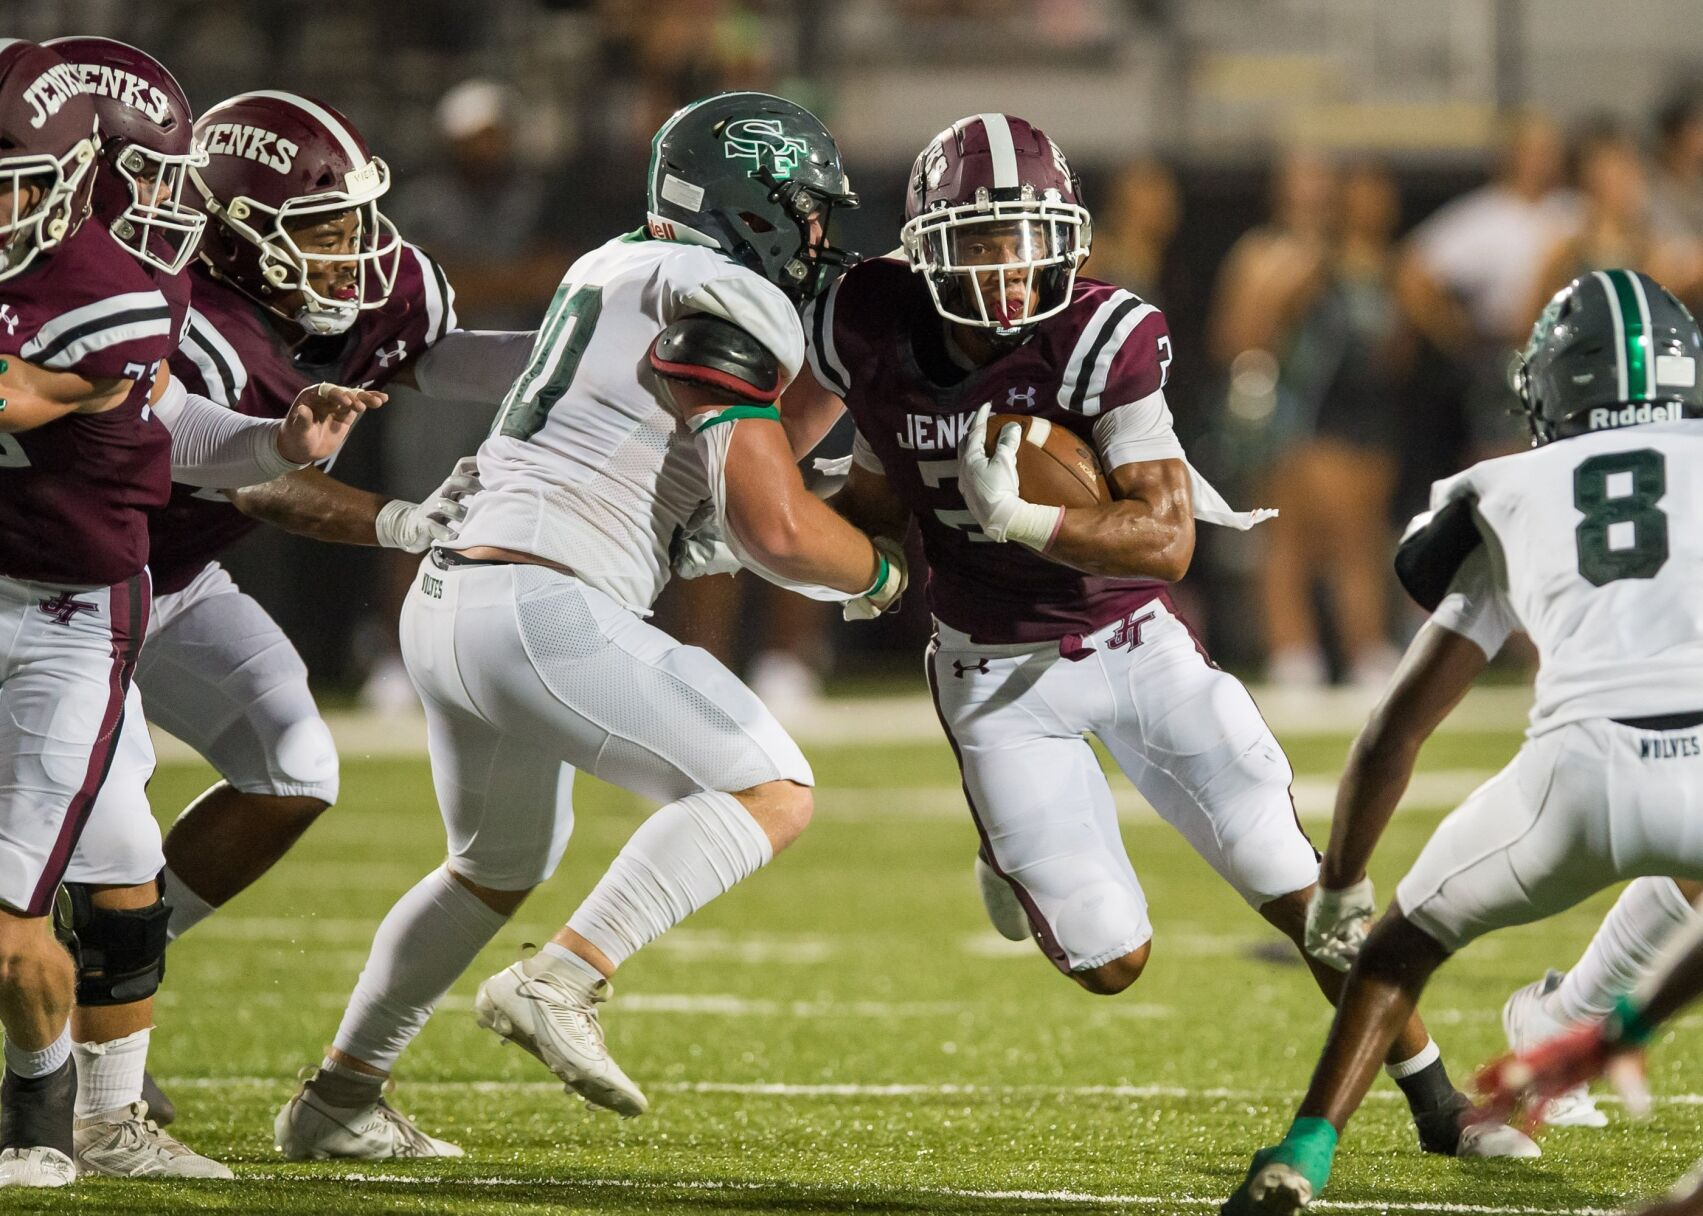 How will Owasso and Jenks rebound? Plus, Hank Puckett's 'incredibly impressive performance'